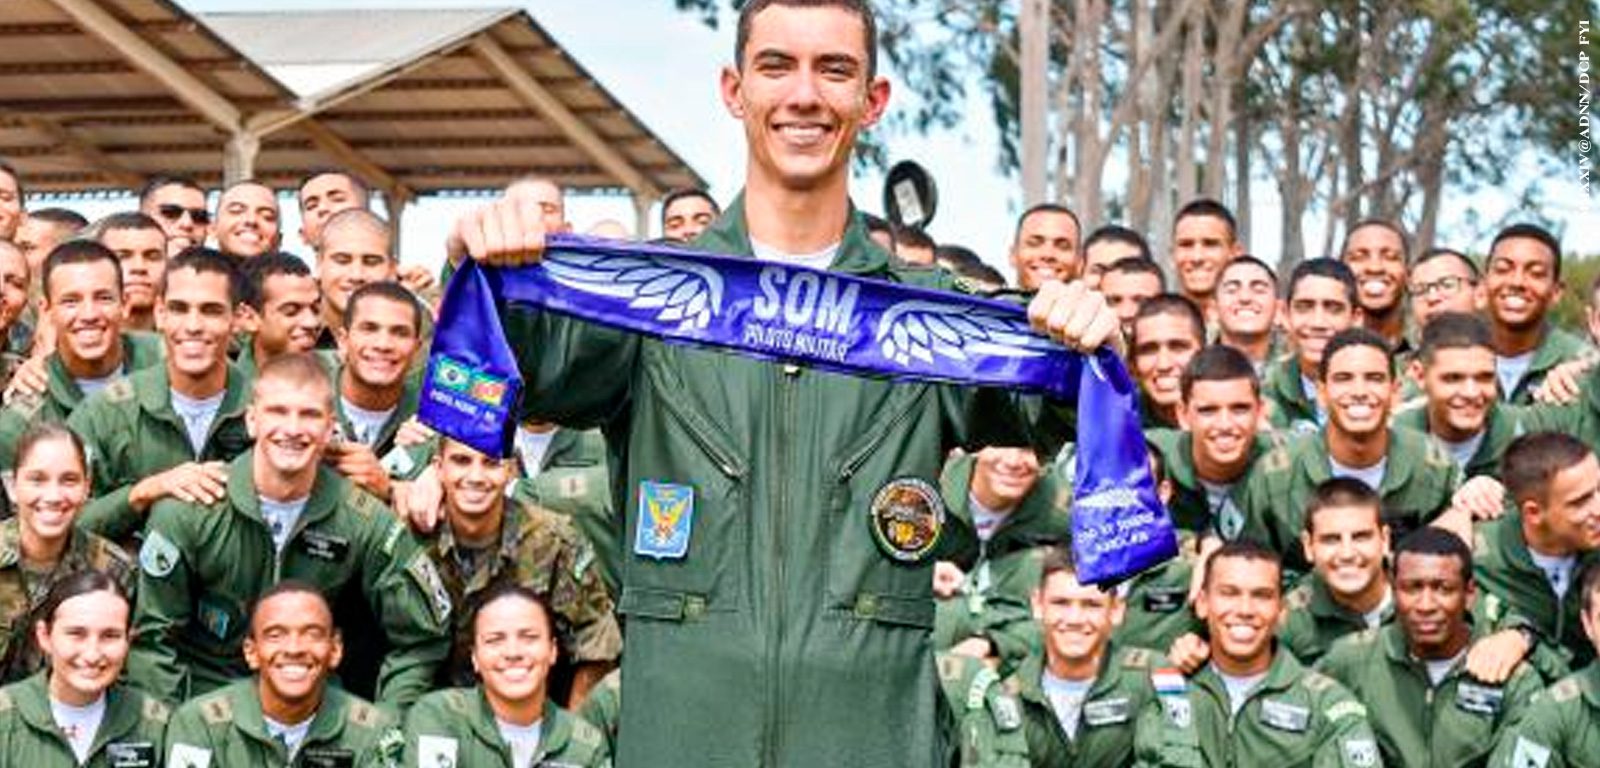 Brazilian Air Force Academy celebrates first solo flight of the year in T-25 Universal aircraft